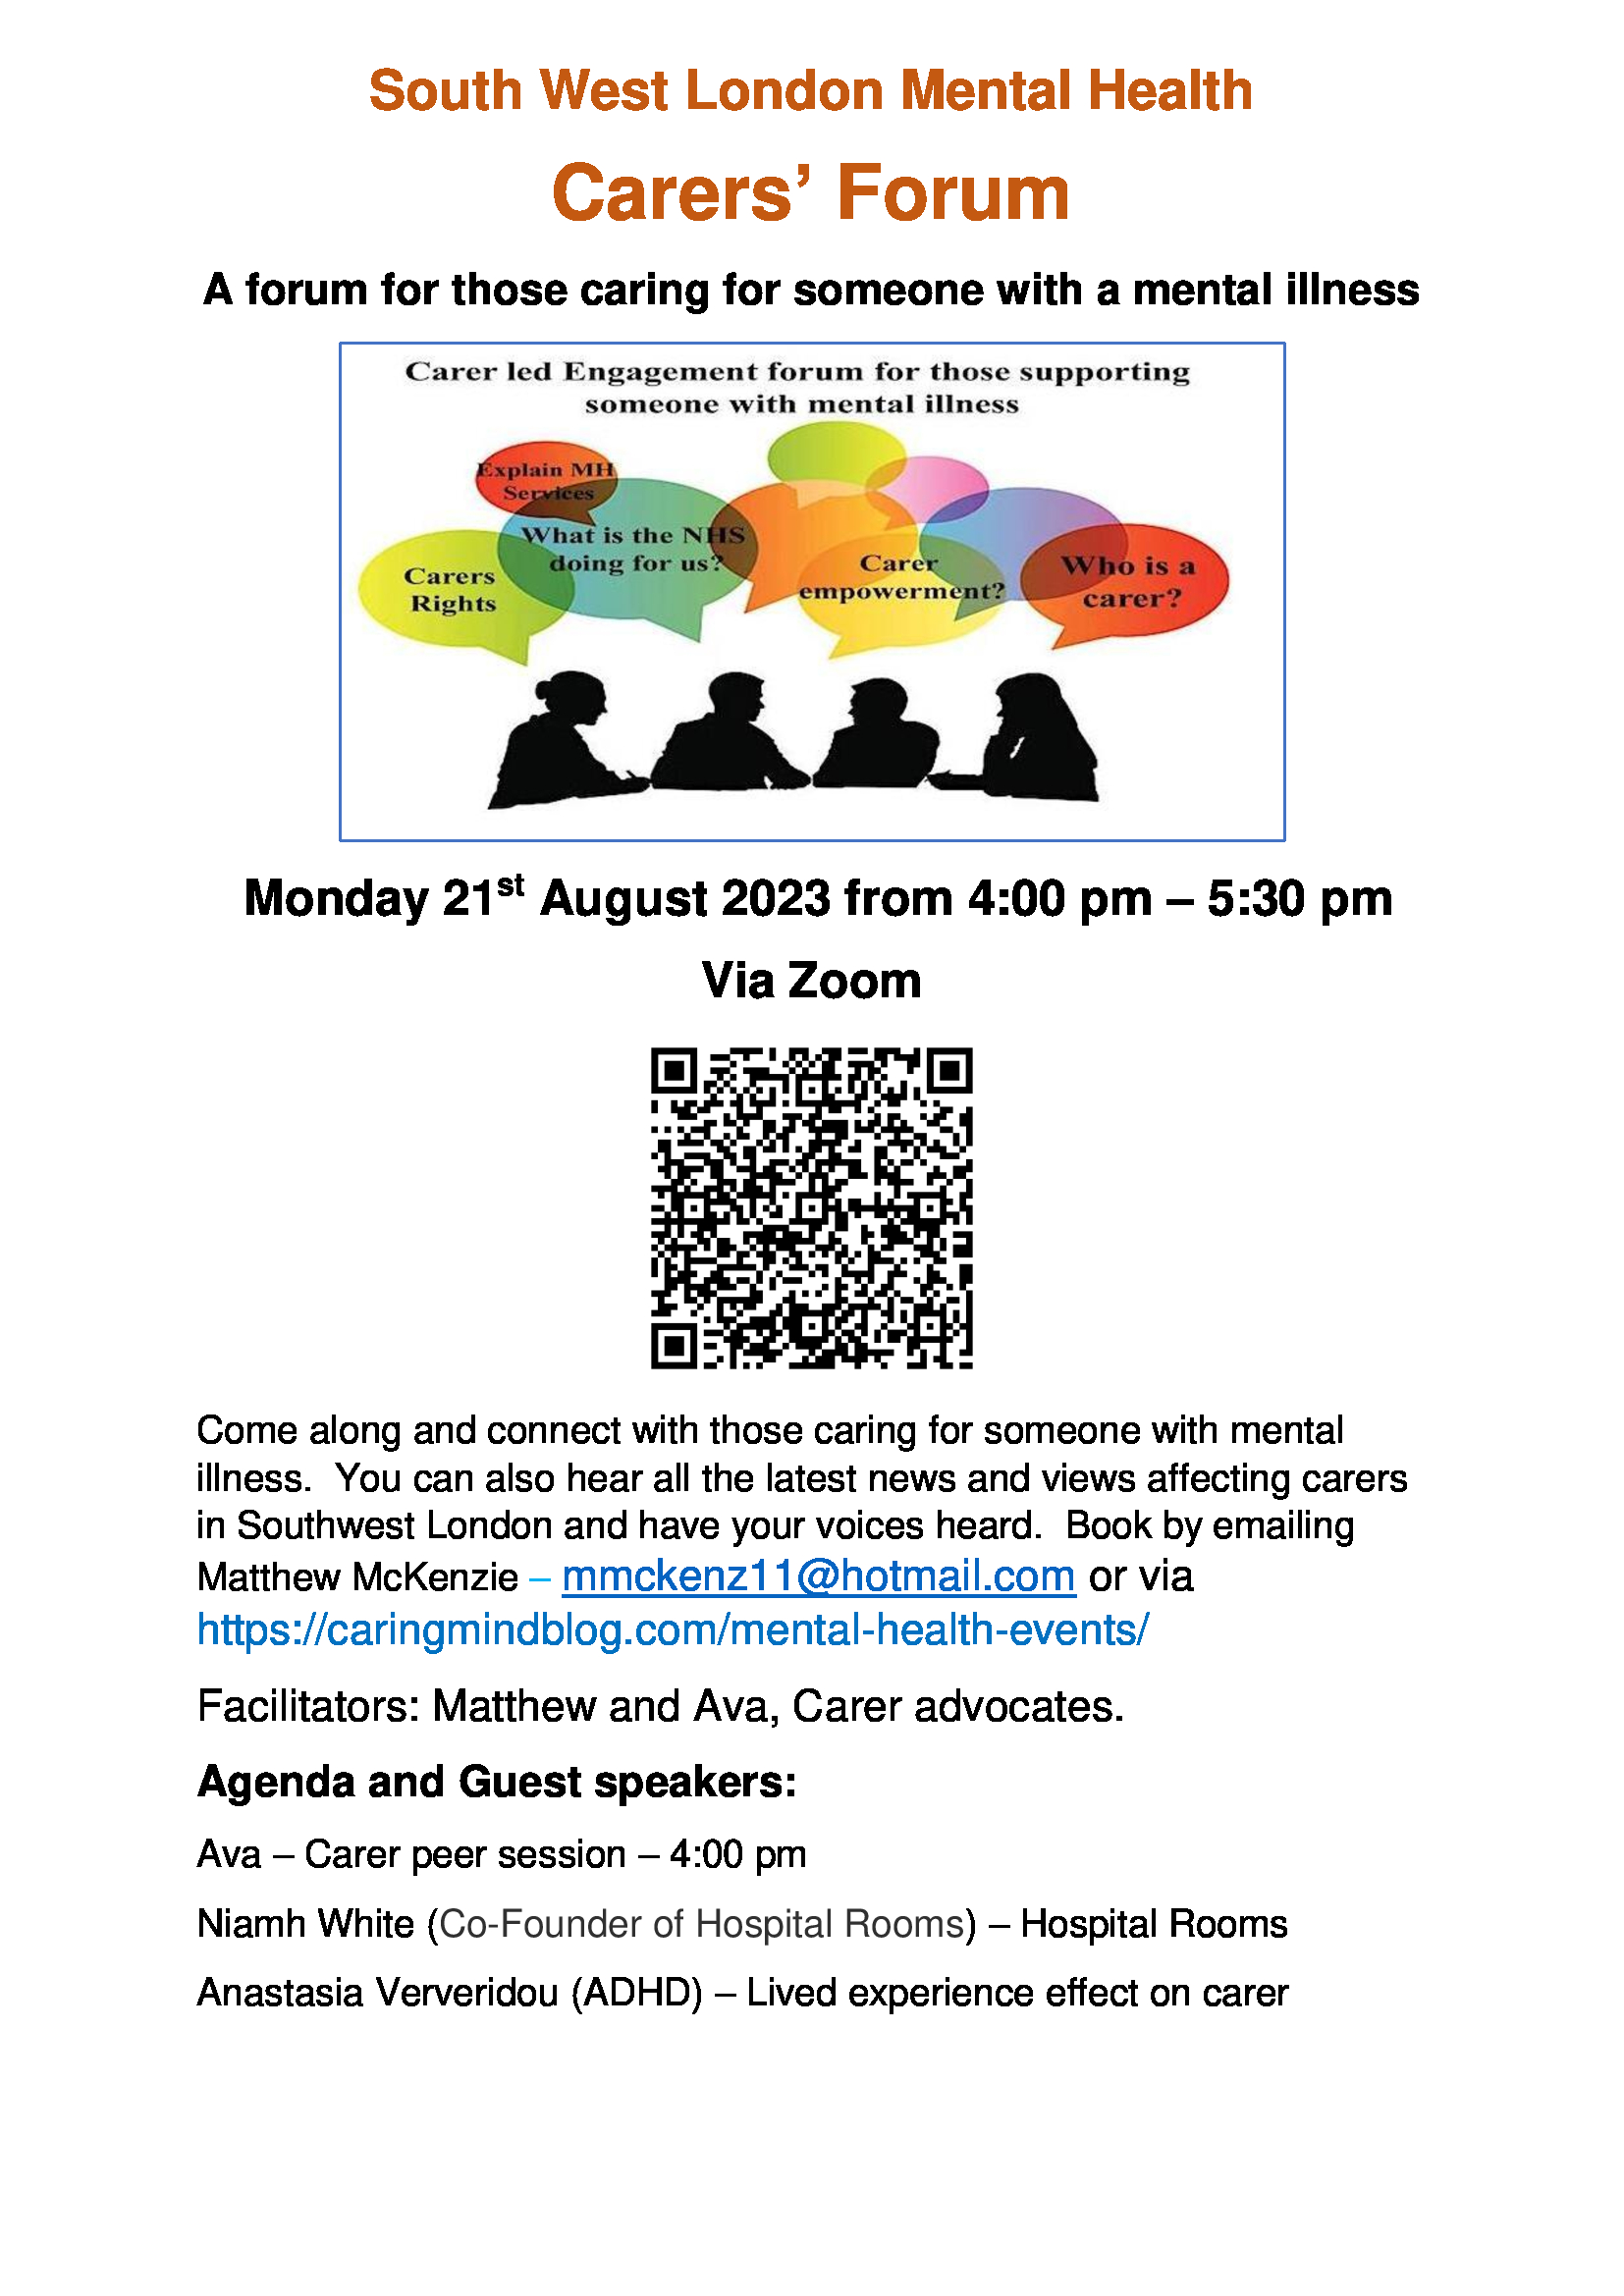 21st August 2023 - South West London Mental Health Carers’ Forum